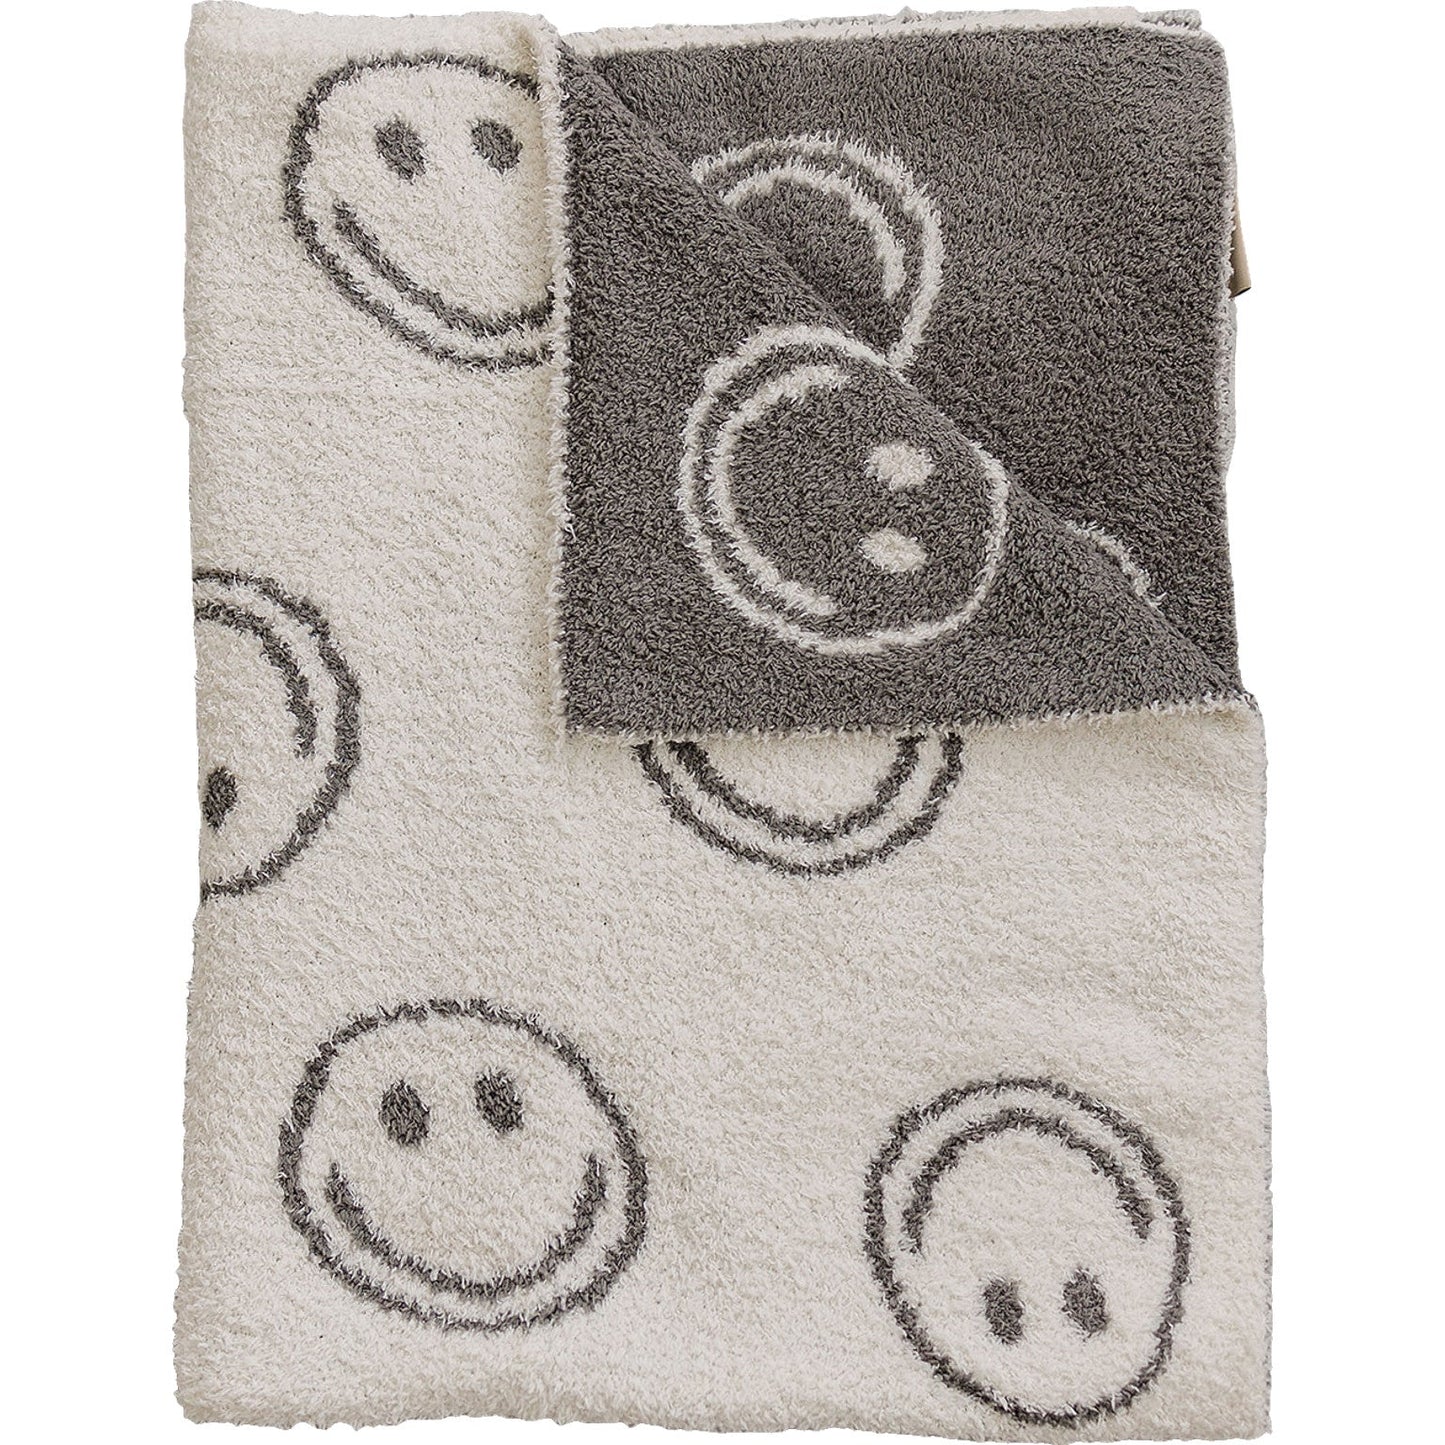 Mebie Baby Charcoal Smiley Taupe Plush Blanket